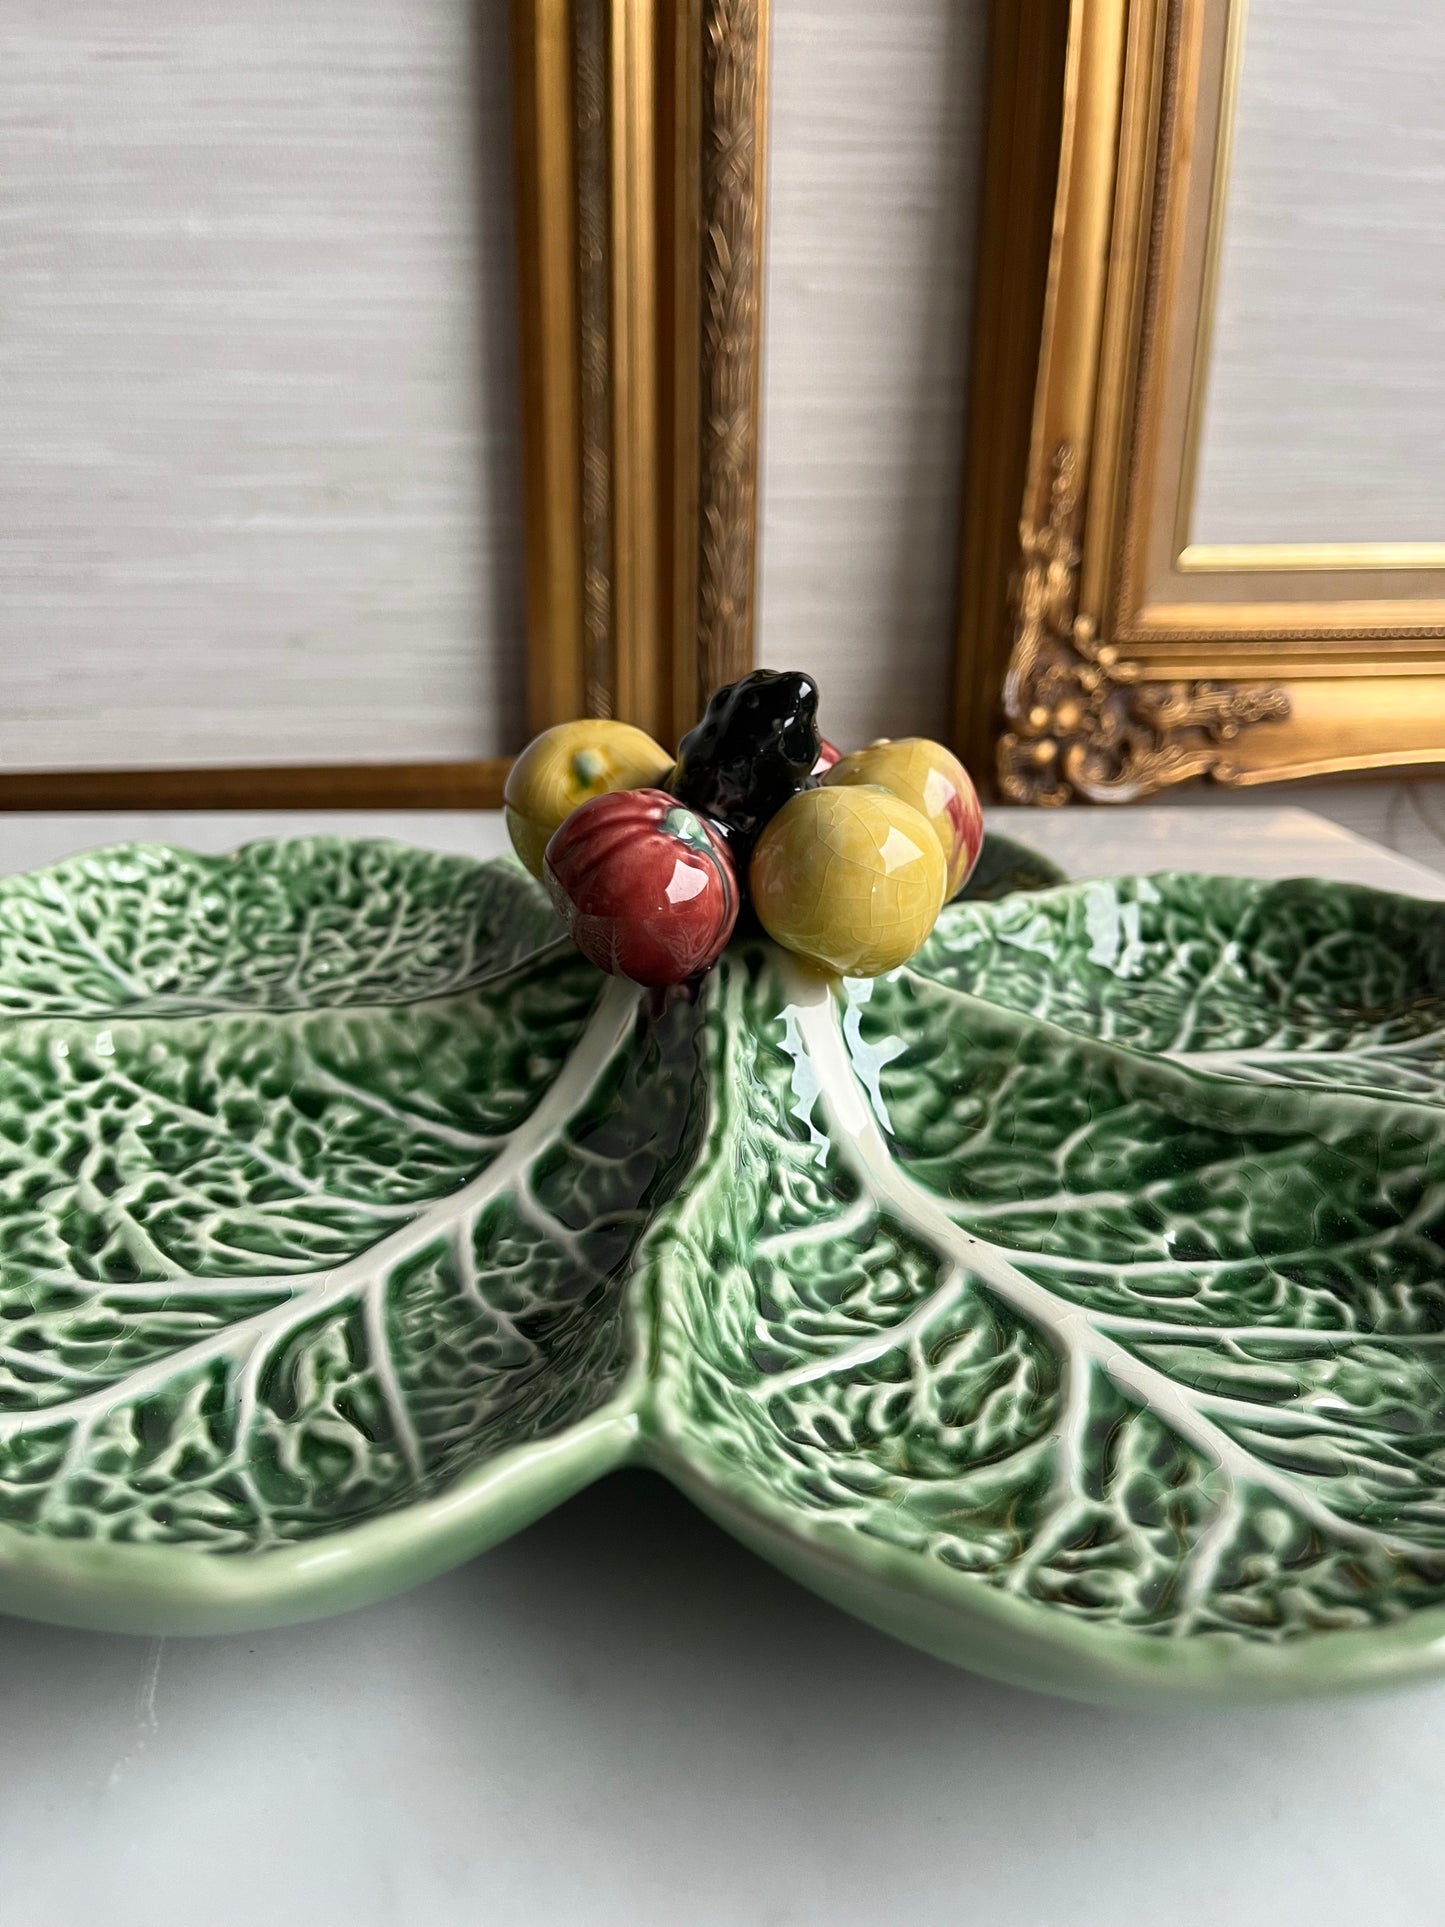 1960s Bordallo Pinheiro Cabbage and Fruits Majolica Platter in Barbott Earthenware With 5 Compartments